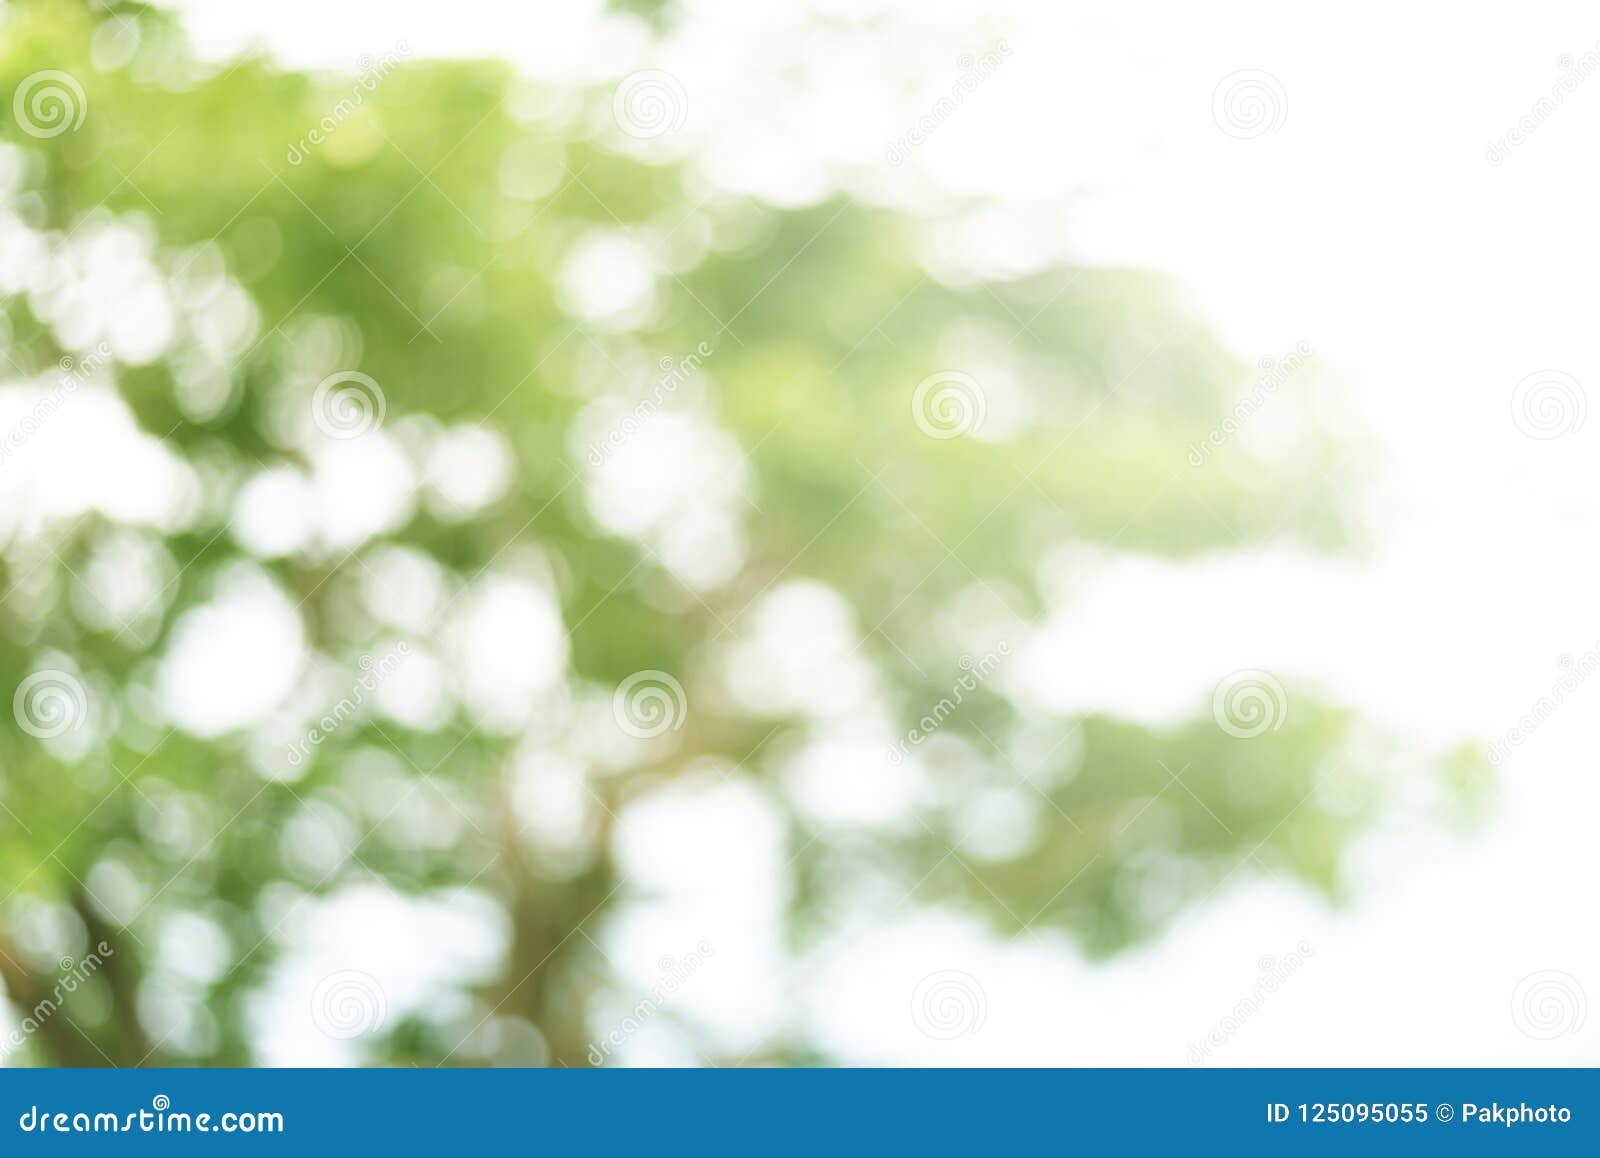 Abstract Nature Blur Background Stock Image - Image of environment, green:  125095055